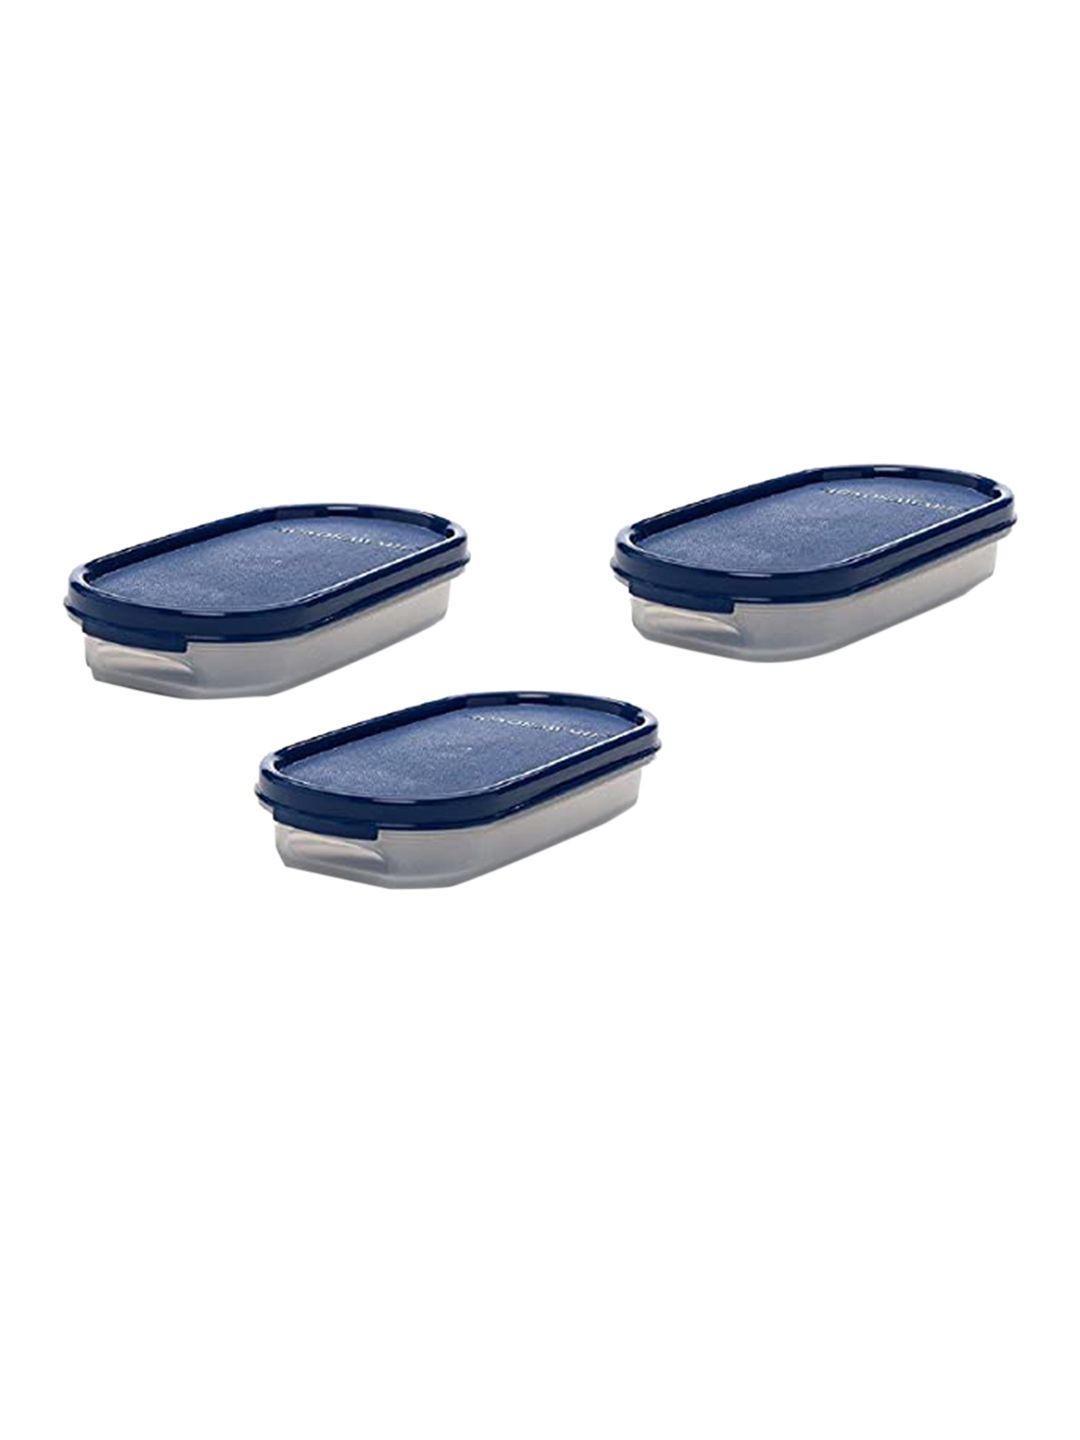 SignoraWare Set Of 3 Blue & Transparent Oval Food Containers Price in India